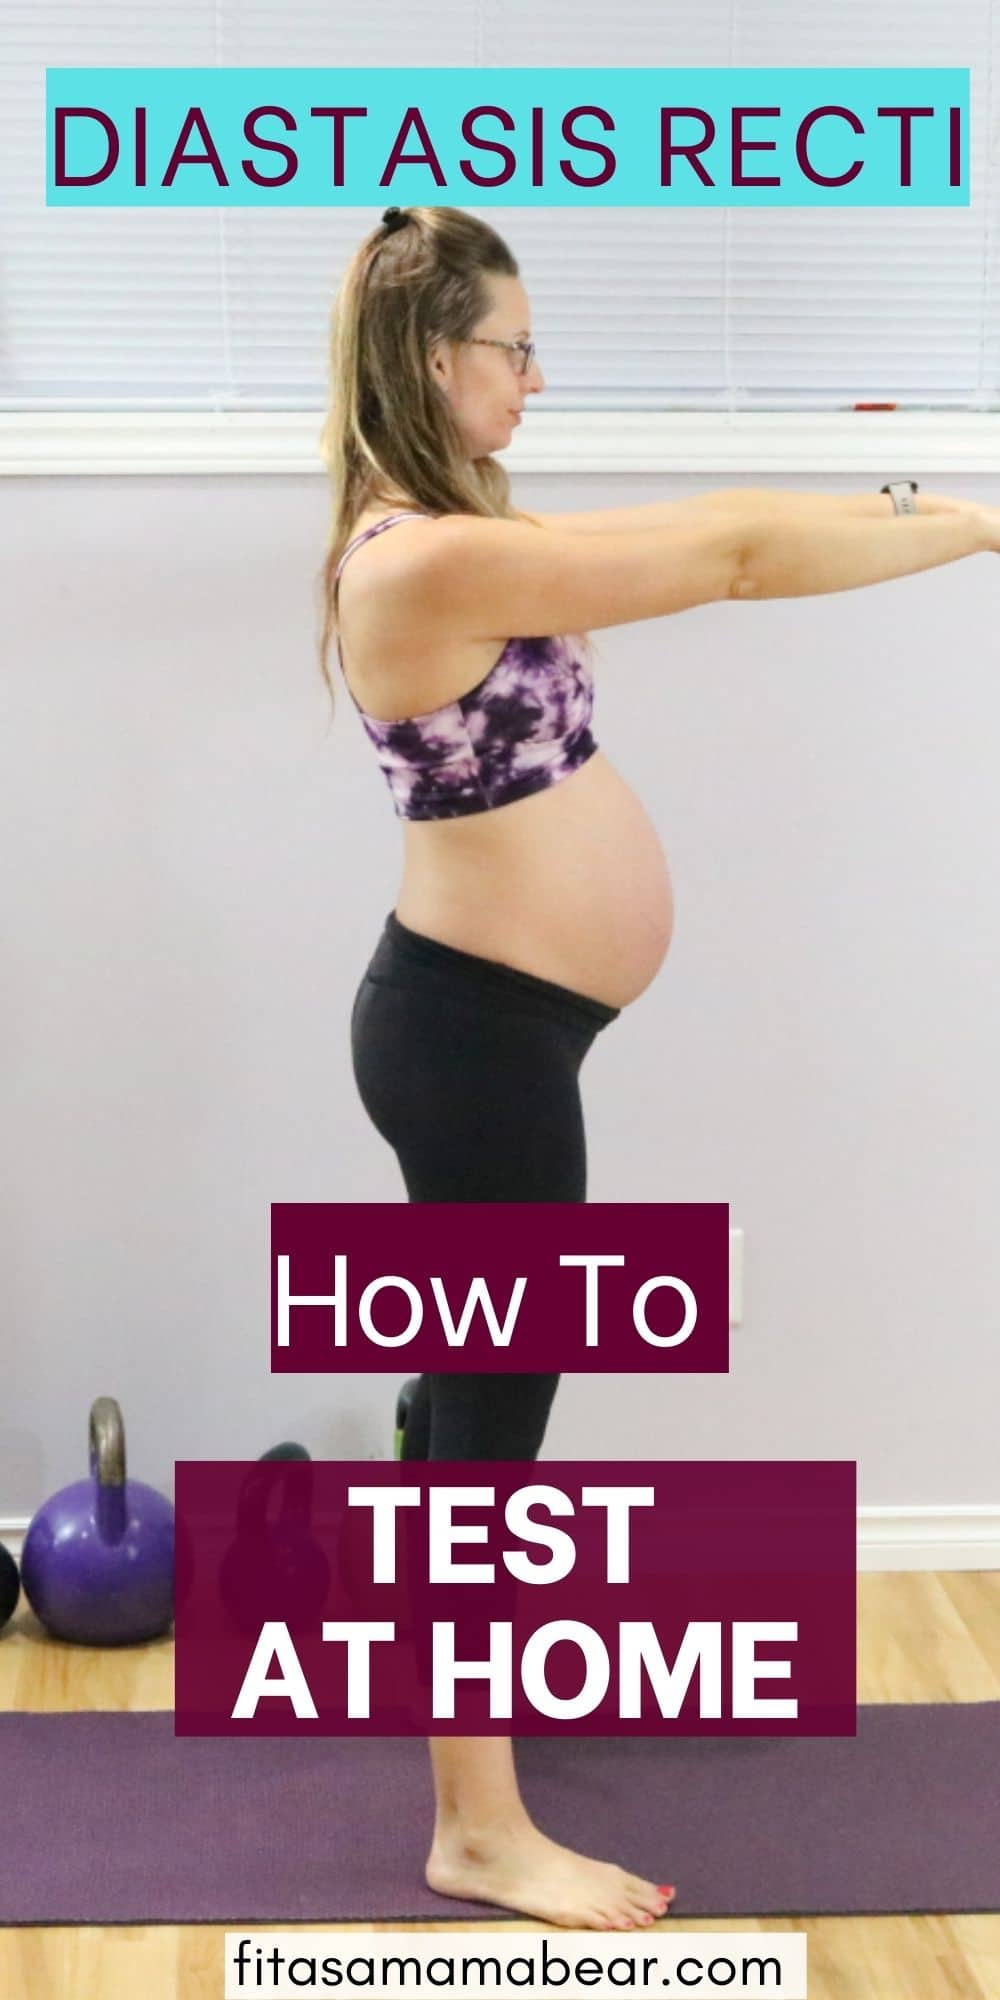 Pin image with text: pregnant lady in a sports bra and pants standing with arms straight out from shoulders and text about diastasis recti